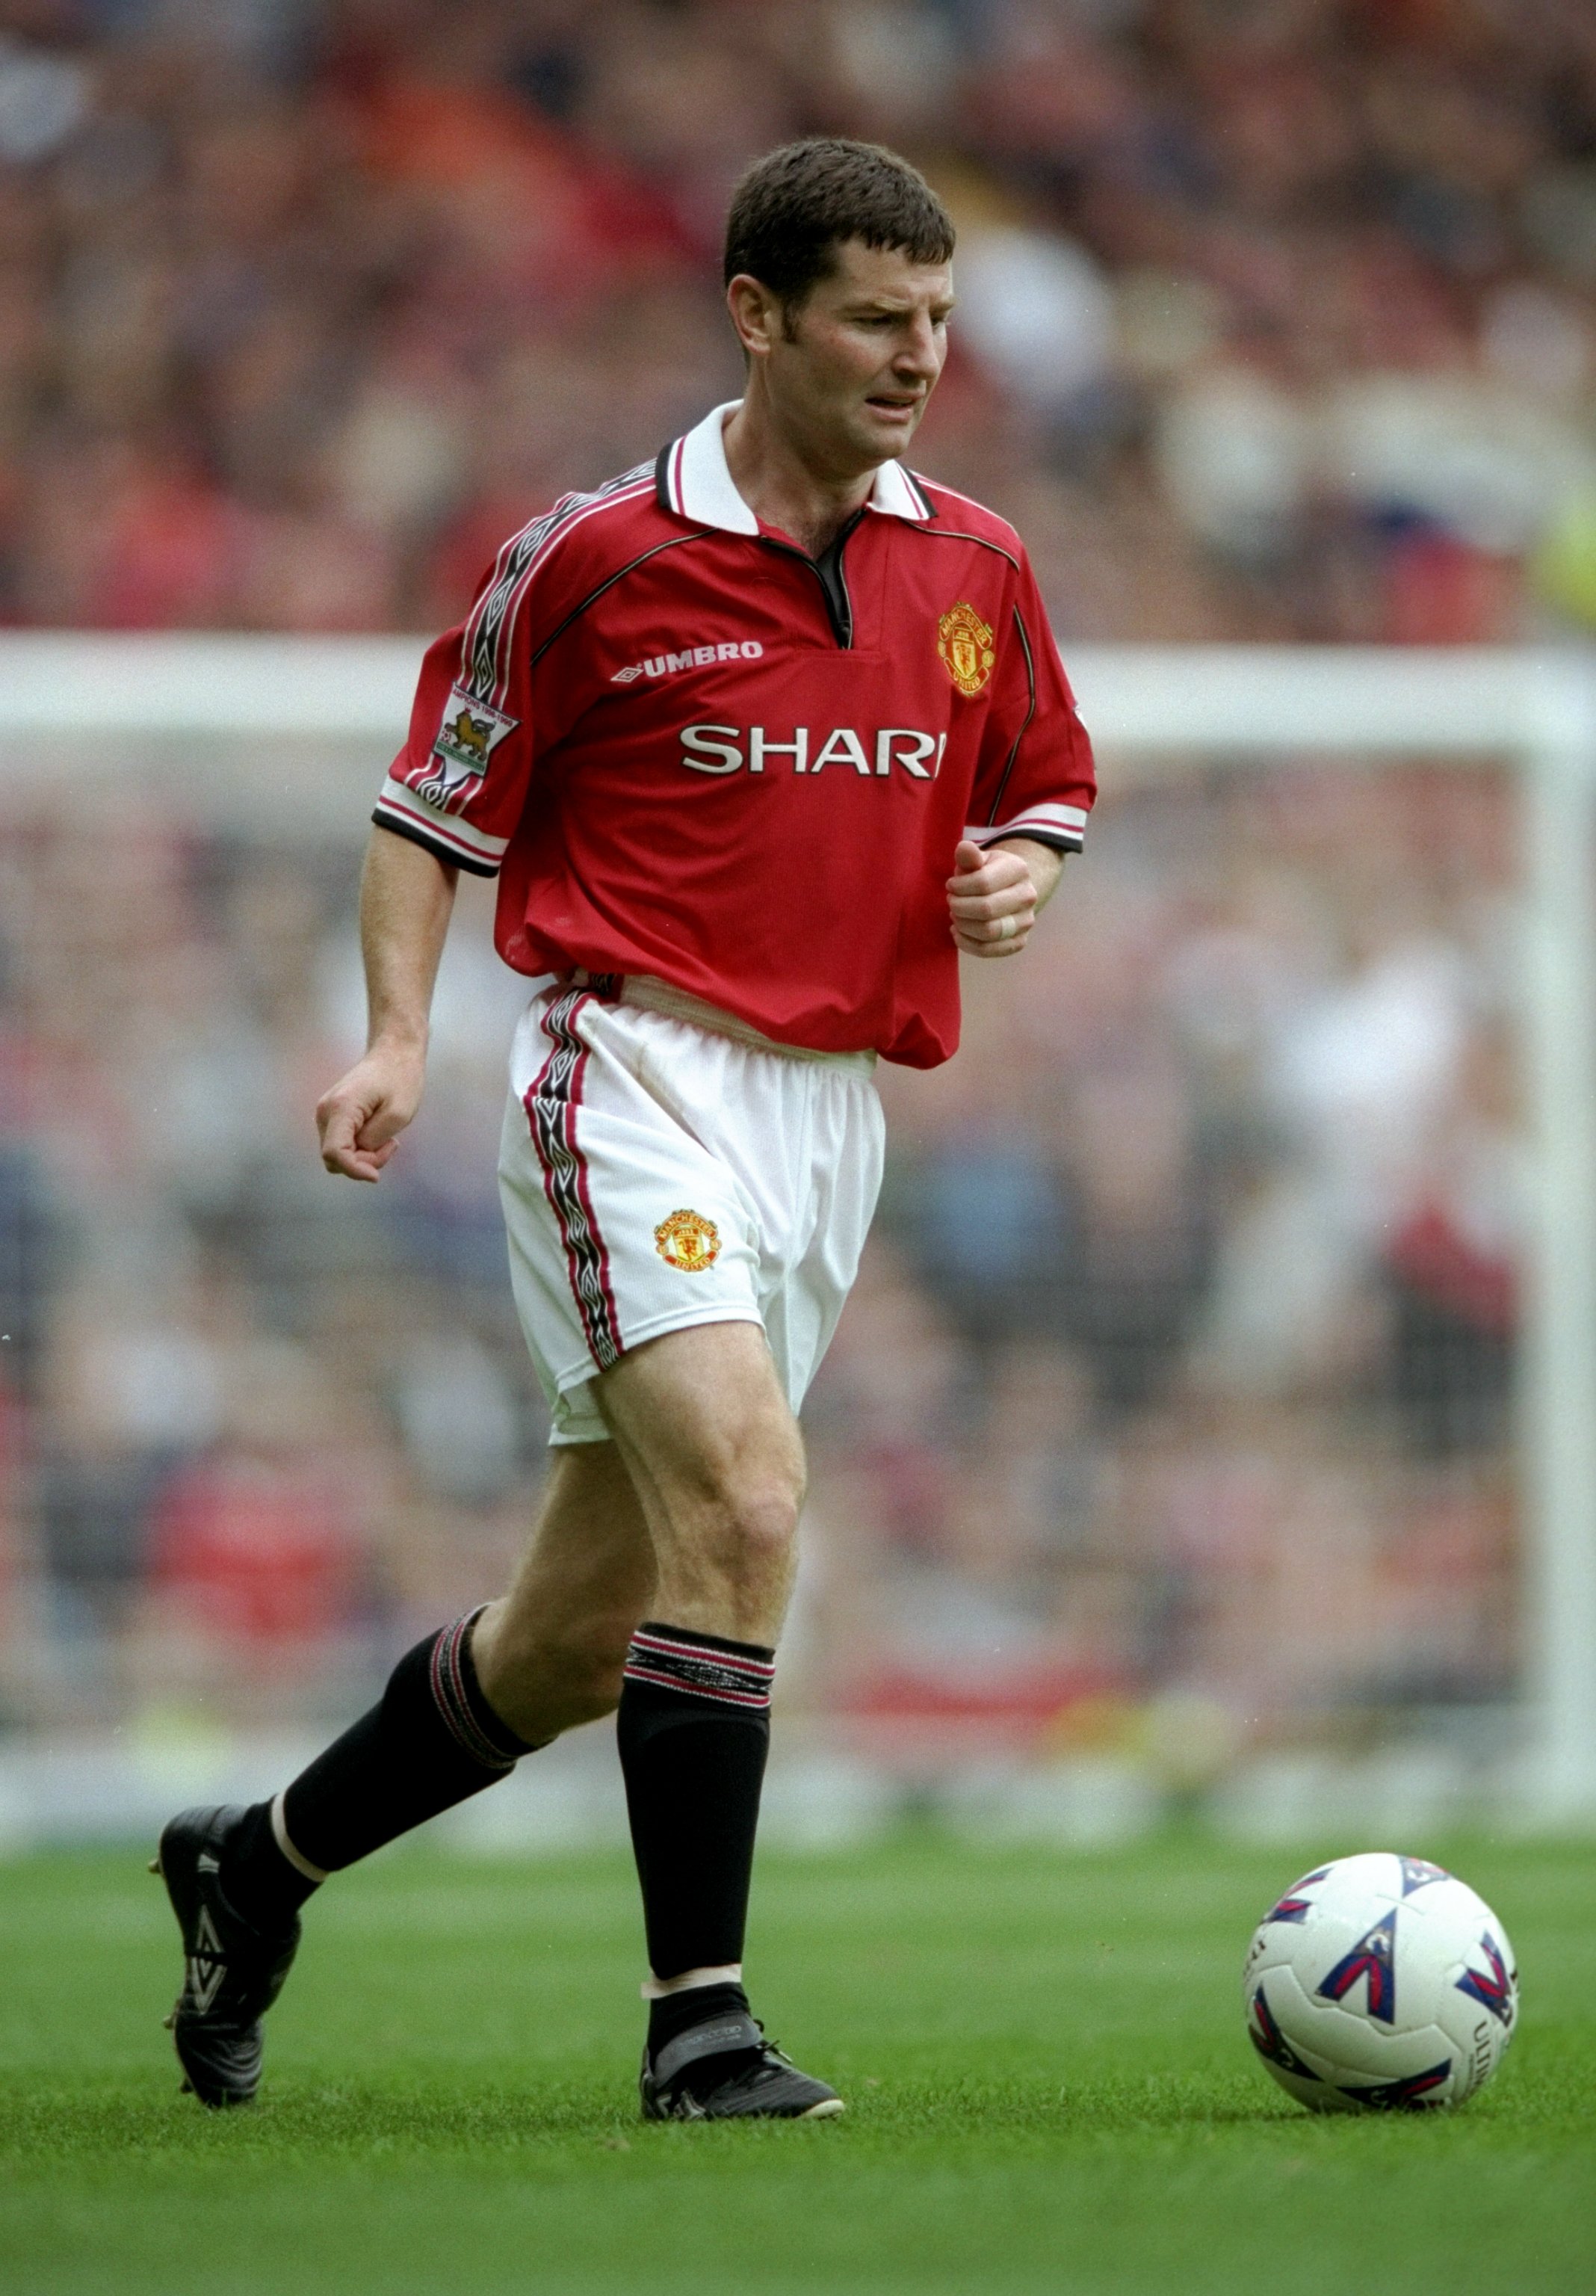 18 Sep 1999:  Denis Irwin of Manchester United in action during the FA Carling Premier League game between Manchester United and Wimbledon at Old Trafford, Manchester, England. The game finished in a 1-1 draw. \ Mandatory Credit: Shaun Botterill /Allsport